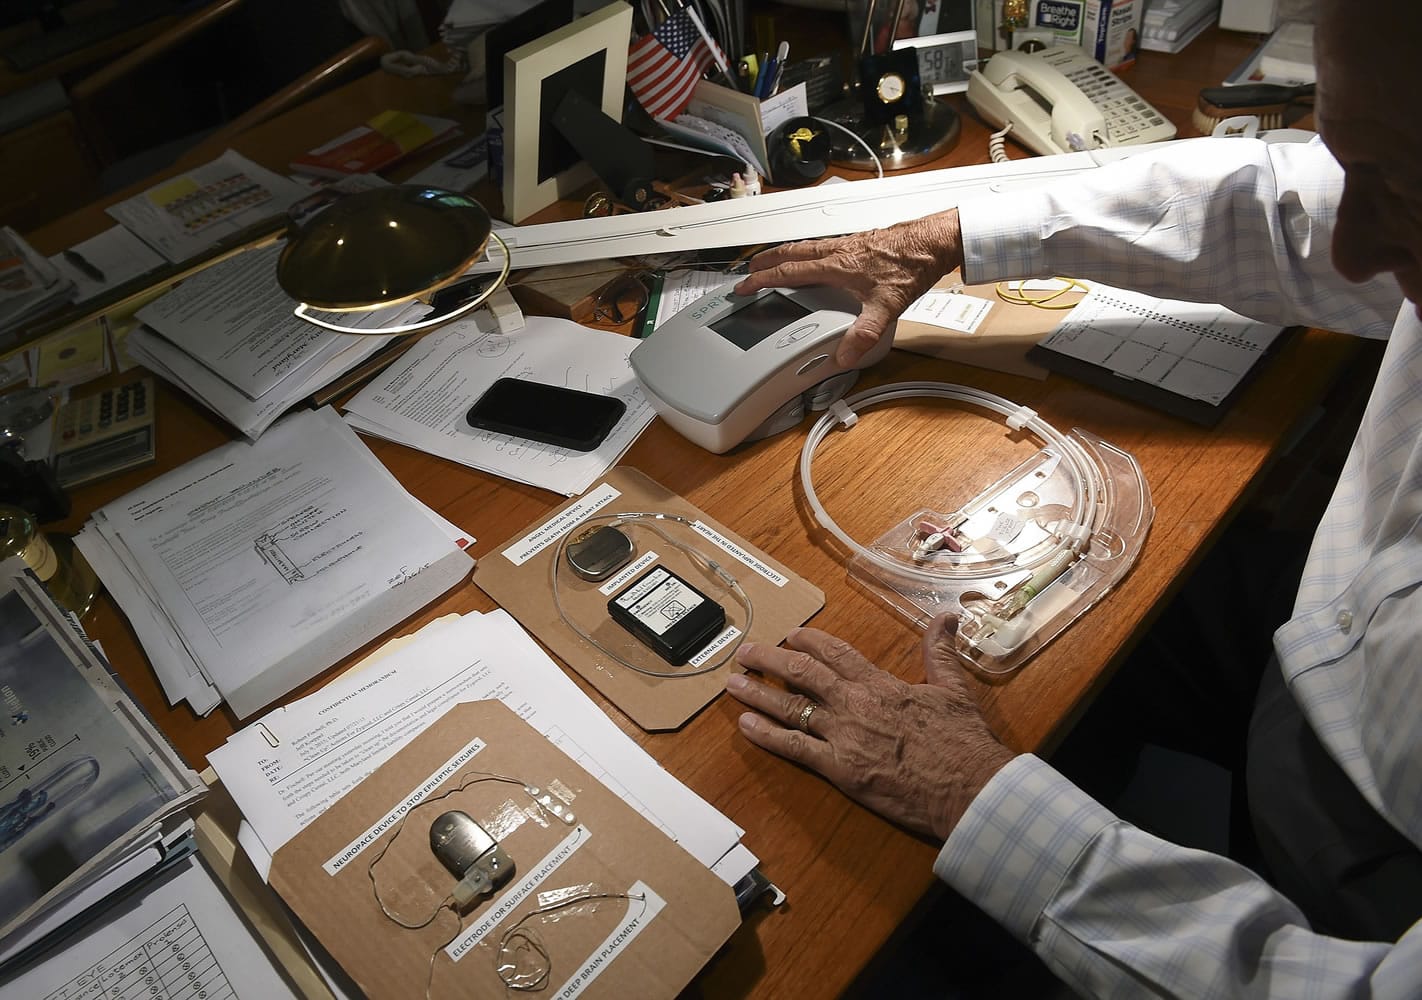 Robert Fischell shows off a few of his medical devices that he has invented. Fischell holds over 200 patents, and has been recognized as the national inventor of the year. Now he's targeting chronic pain. Illustrates PAIN (category a), by Terrence McCoy (c) 2015, The Washington Post. Moved Saturday, August 1, 2015. (MUST CREDIT: Washington Post photo by Toni L.